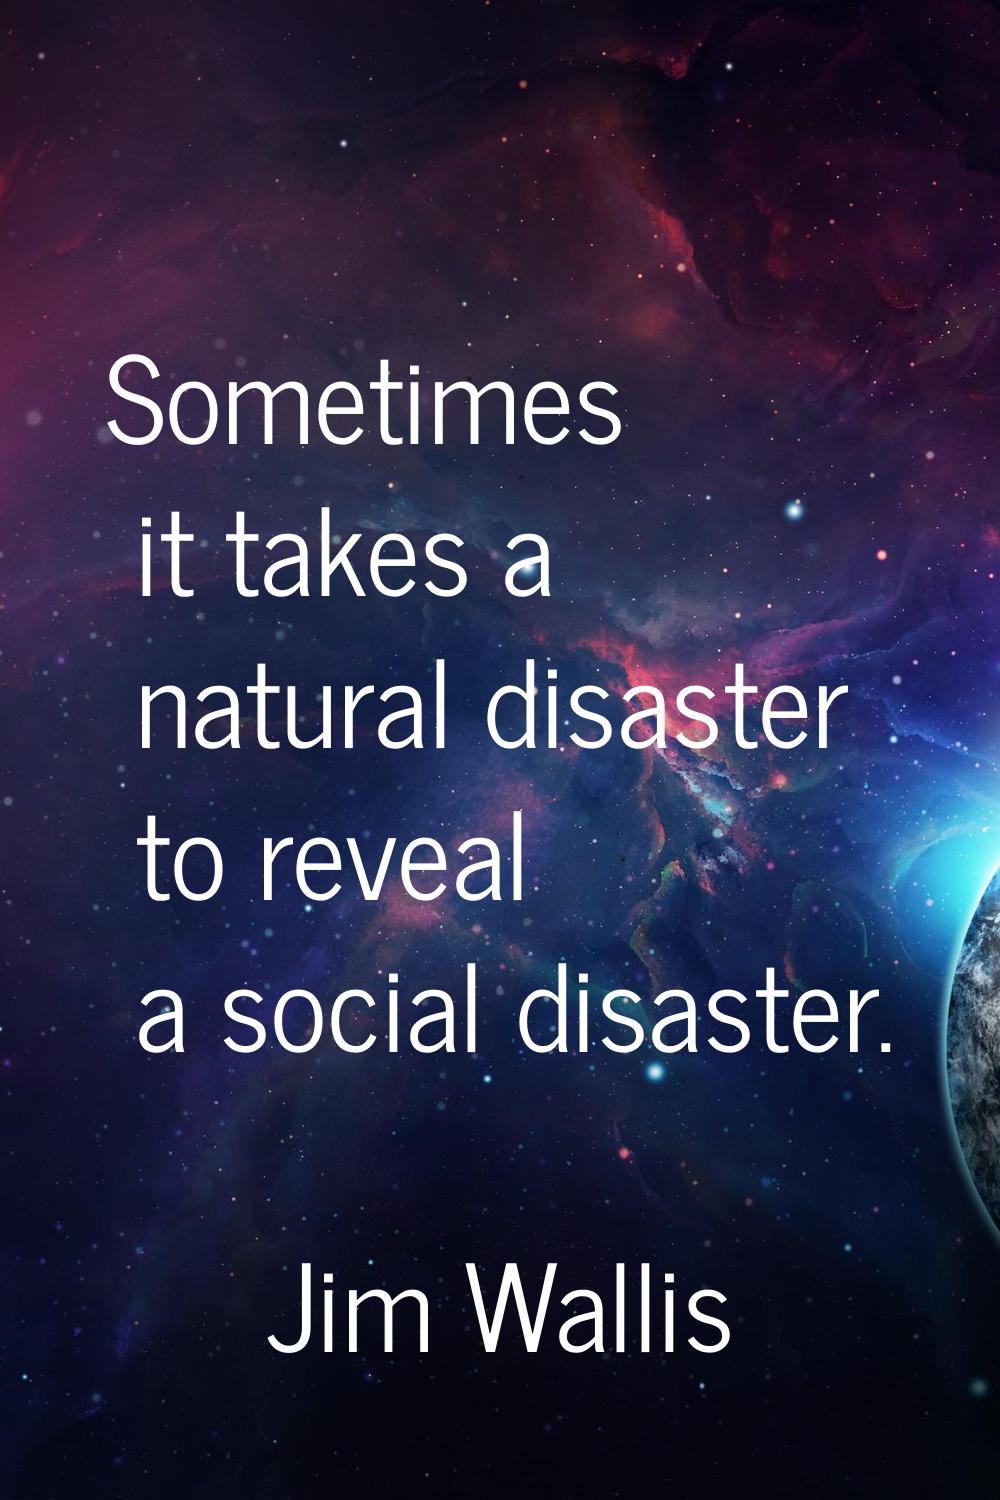 Sometimes it takes a natural disaster to reveal a social disaster.